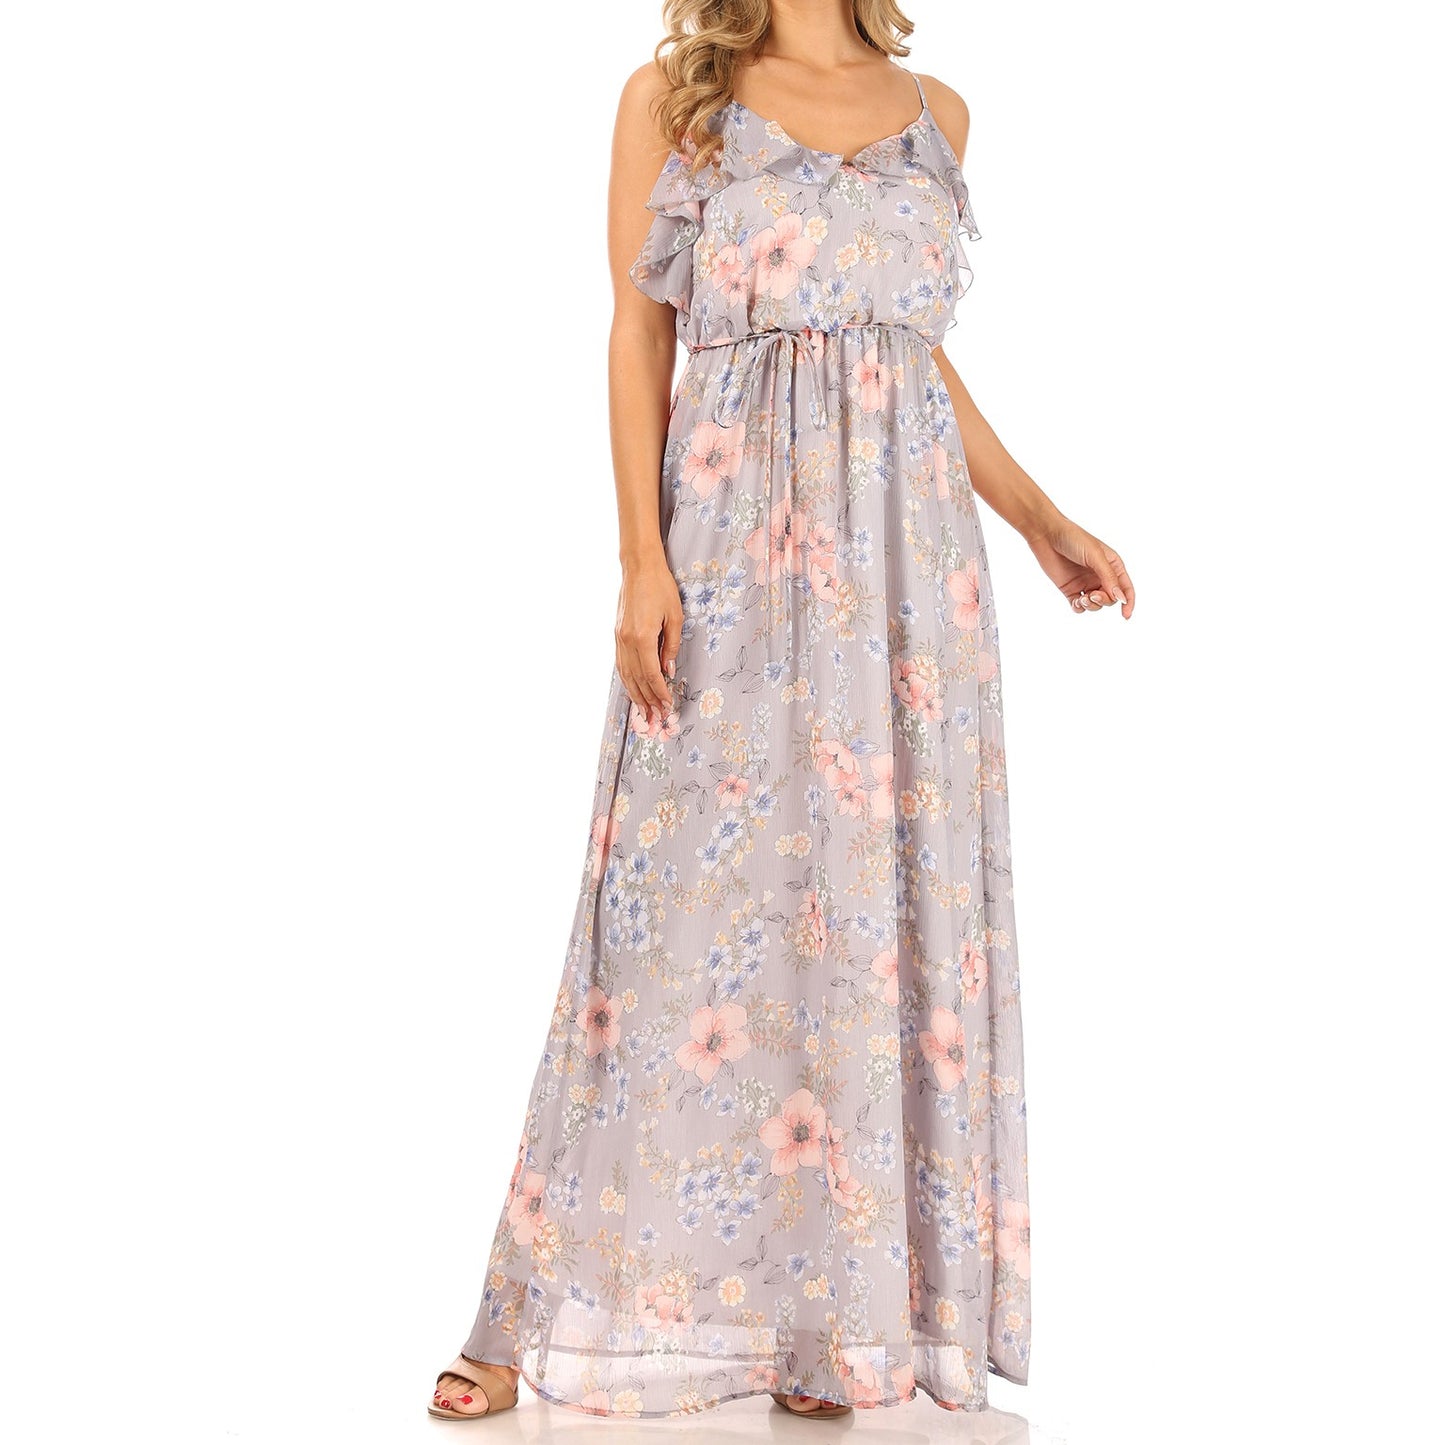 Only You Chiffon Floral Maxi Dress